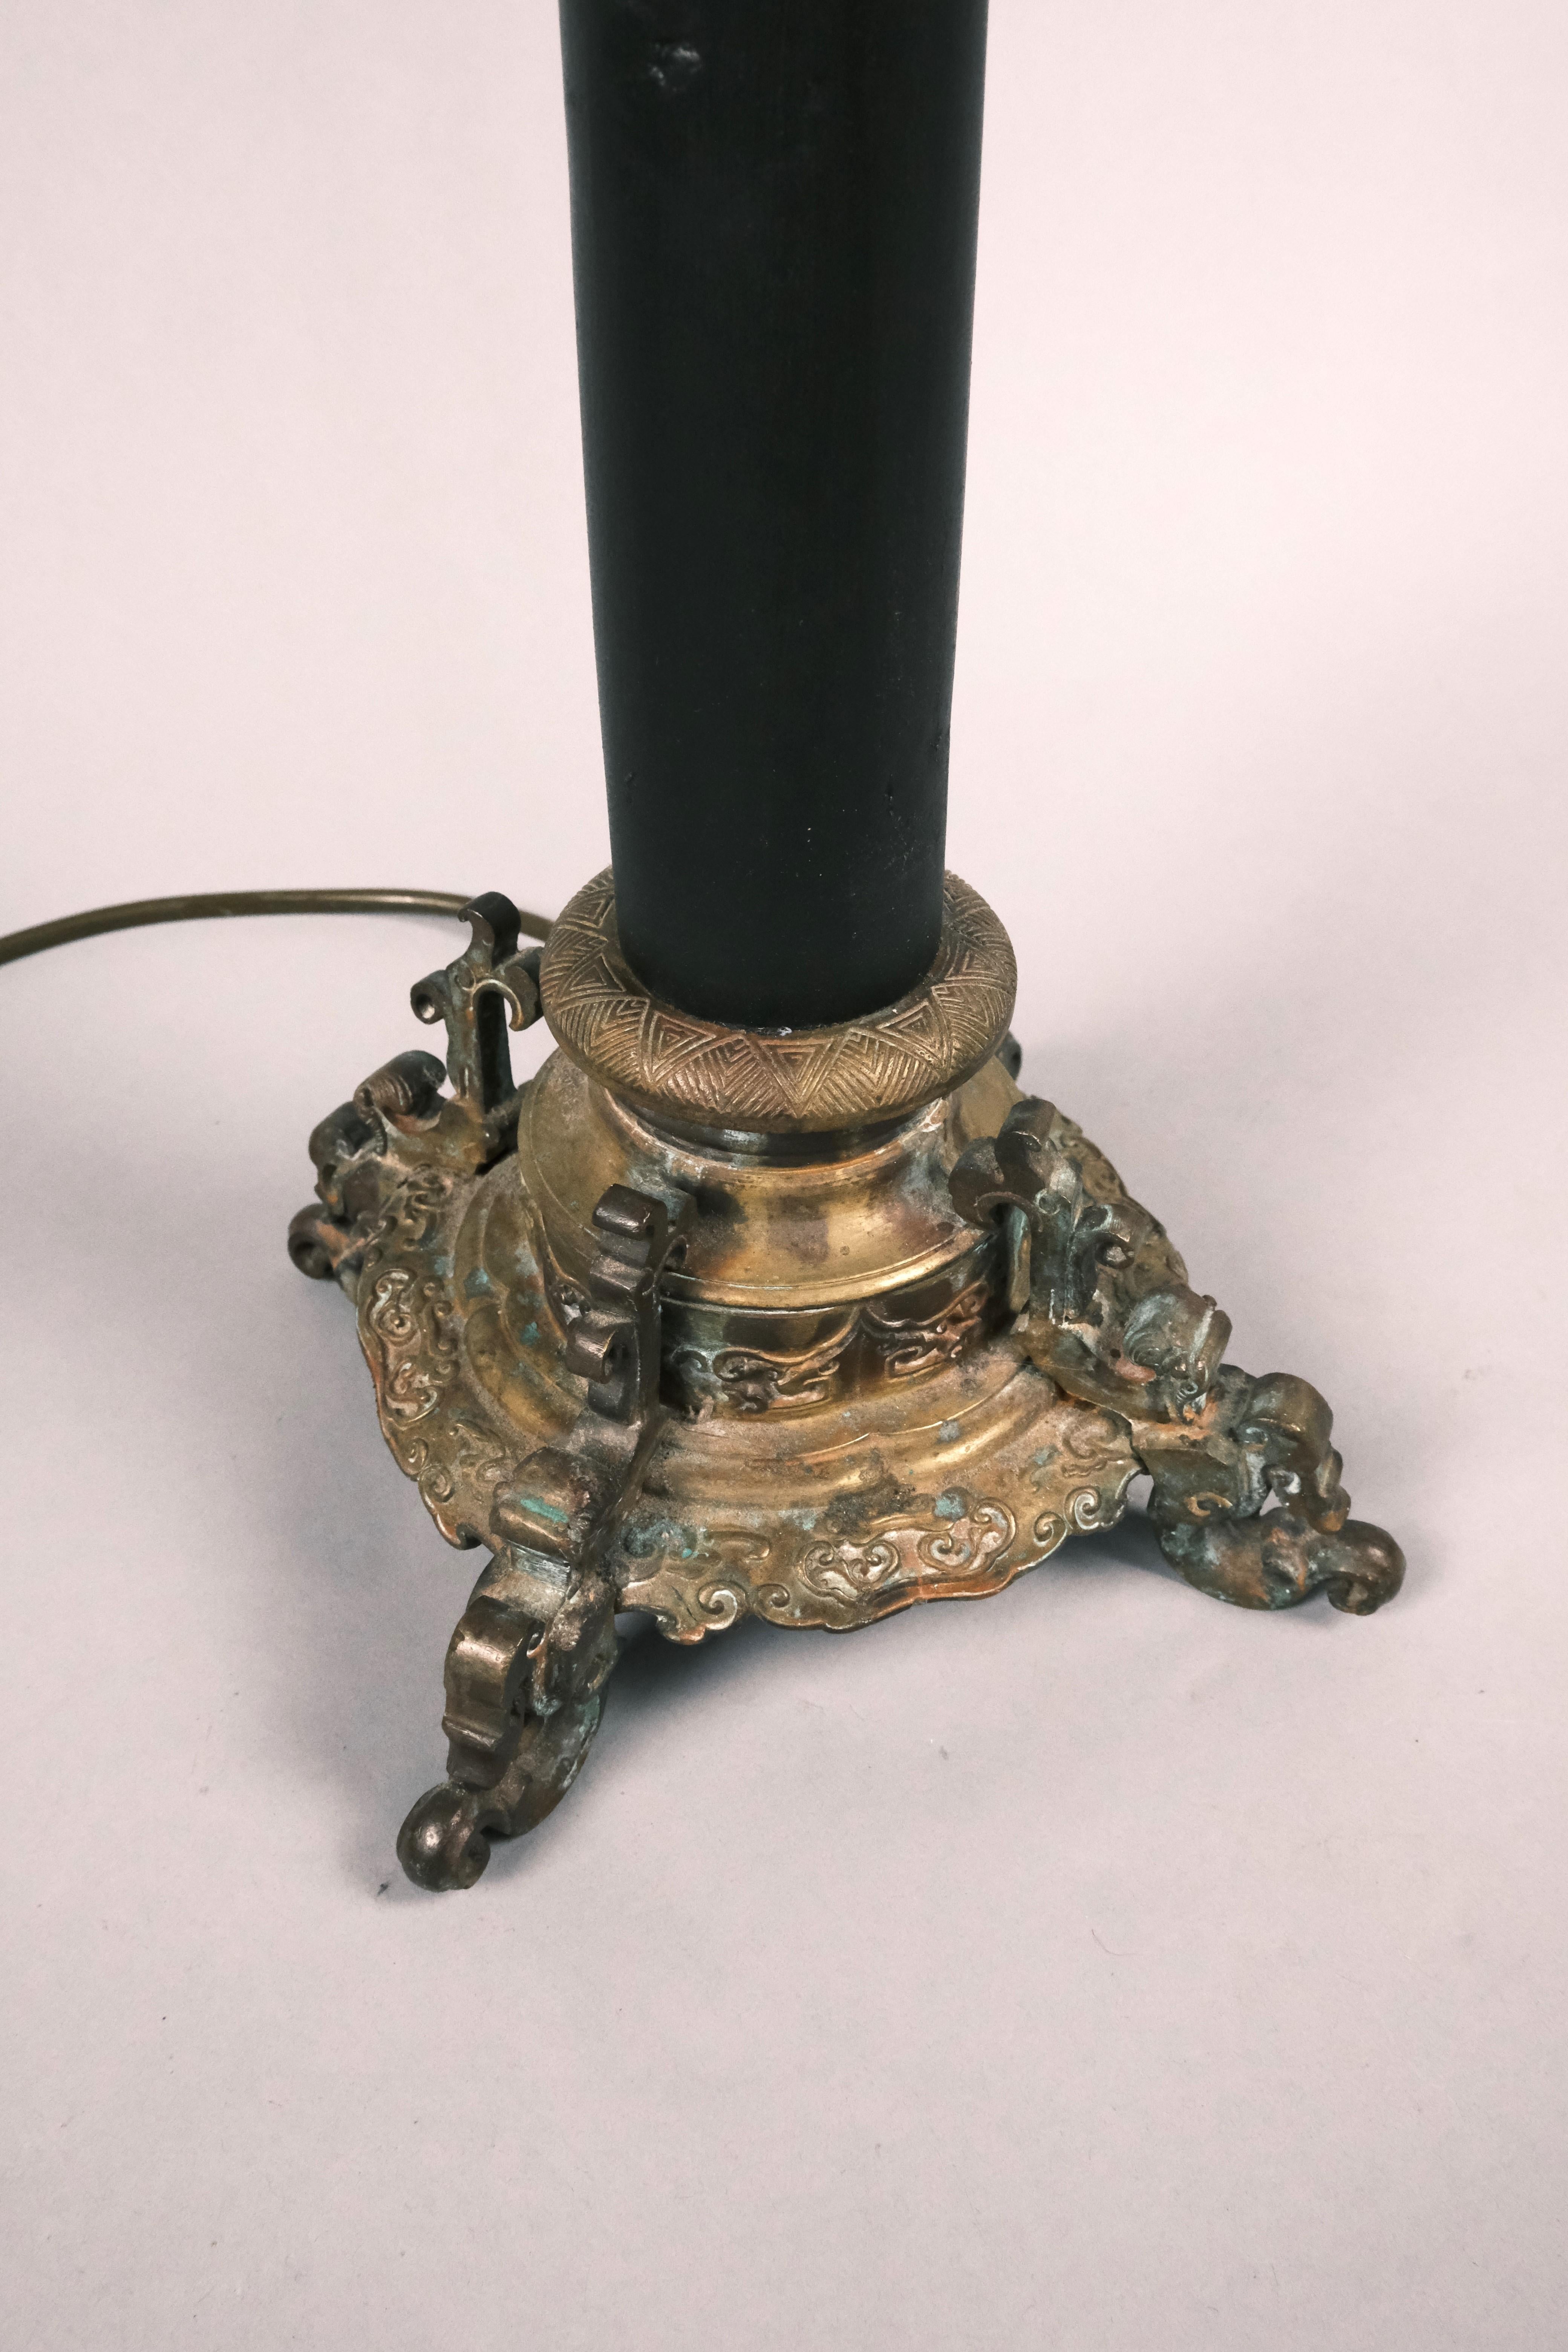 Hutton-Clarke Antiques is delighted to present an elegant antique Chinese-style bronze table lamp, skillfully converted to electricity for modern convenience. This well-proportioned and substantial piece boasts fine quality casting, highlighting its